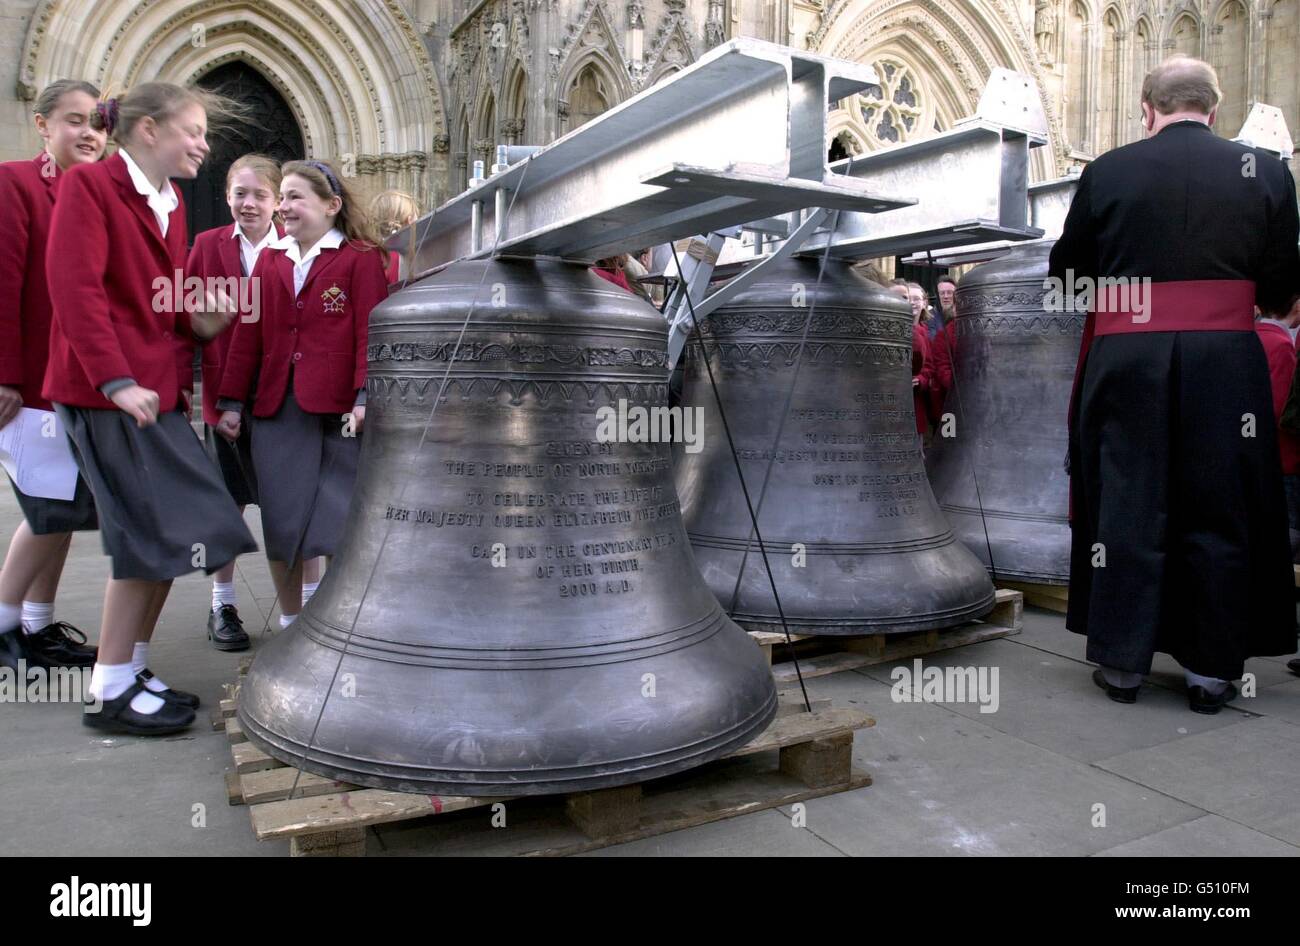 The Dean of York, the Very Revd Dr Raymond Furnell conducts a short service of dedication for the six new chiming bells to Commemorate the life of the Queen Mother in her Centenary year at York Minster, York where the bells were installed. Stock Photo